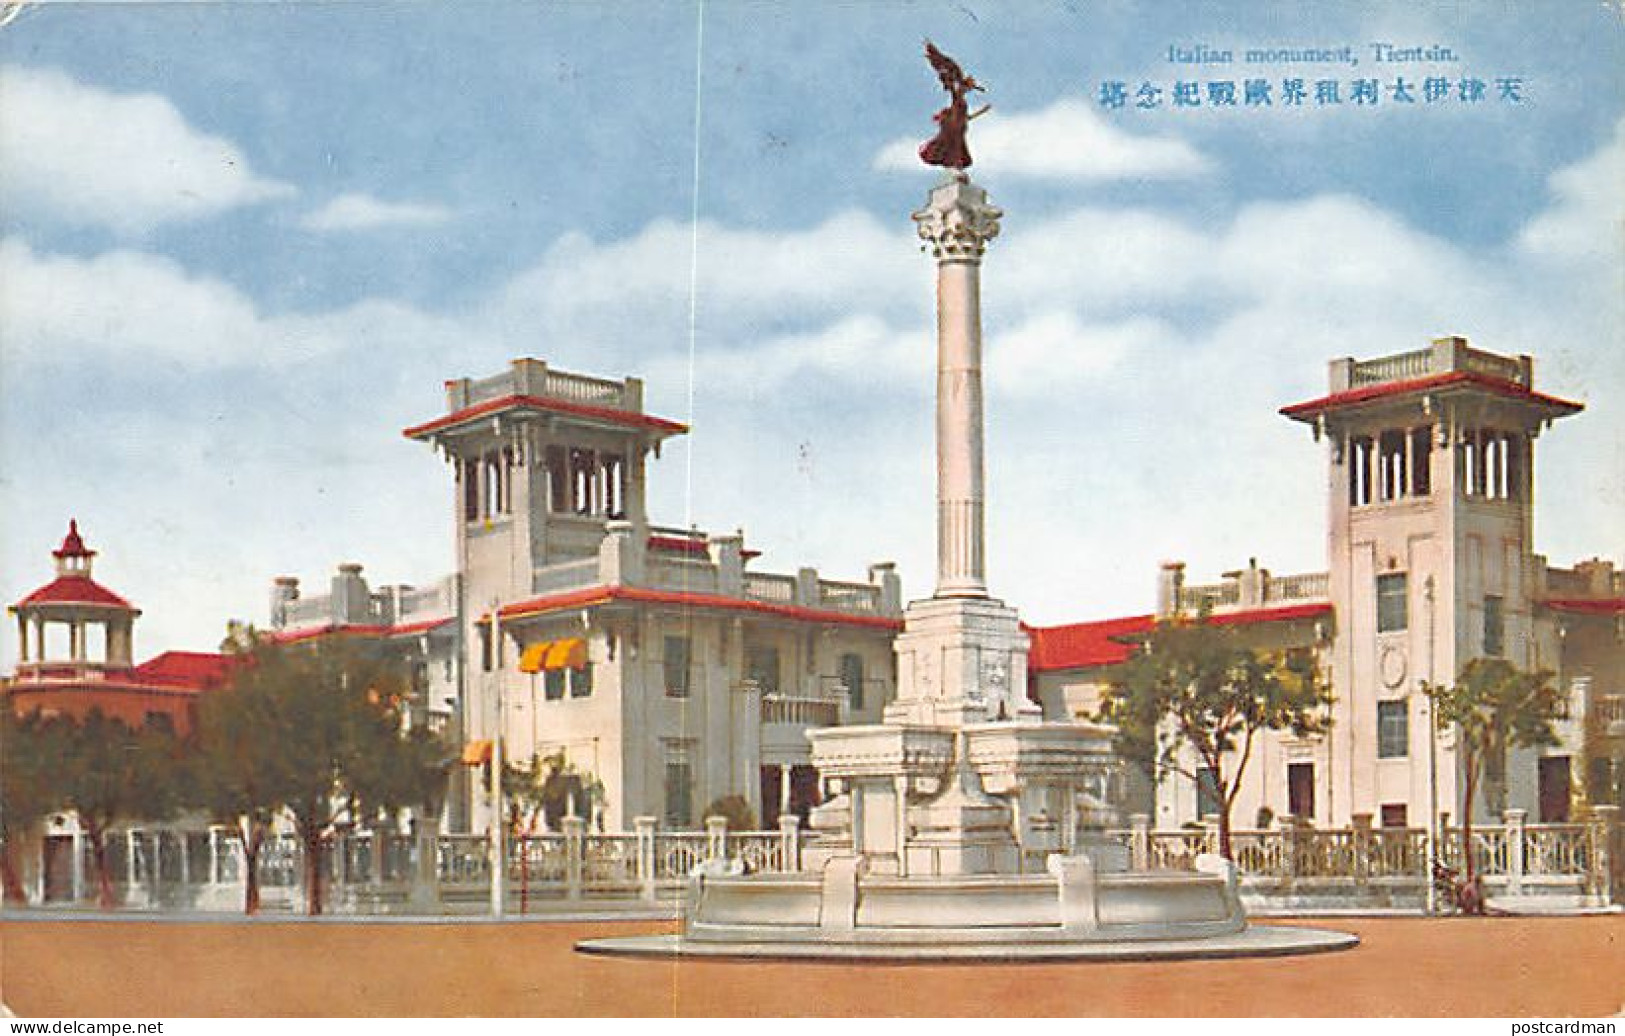 China - TIENTSIN - The Italian Monument - Publ. Unknown  - Cina